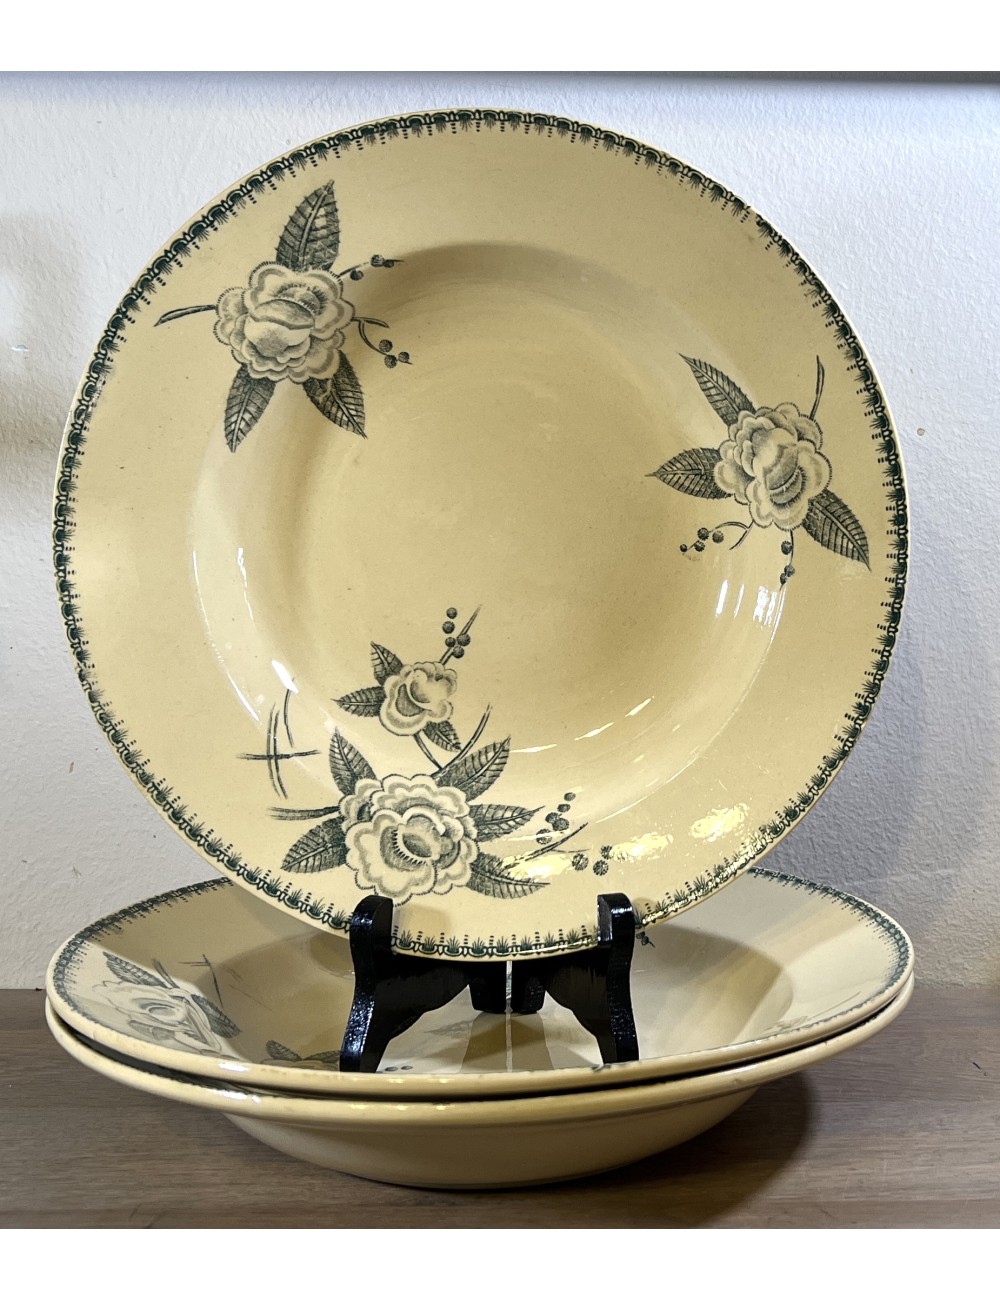 Deep plate / Soup plate / Pasta plate - Boch - decor ANDREE in green on a beige background